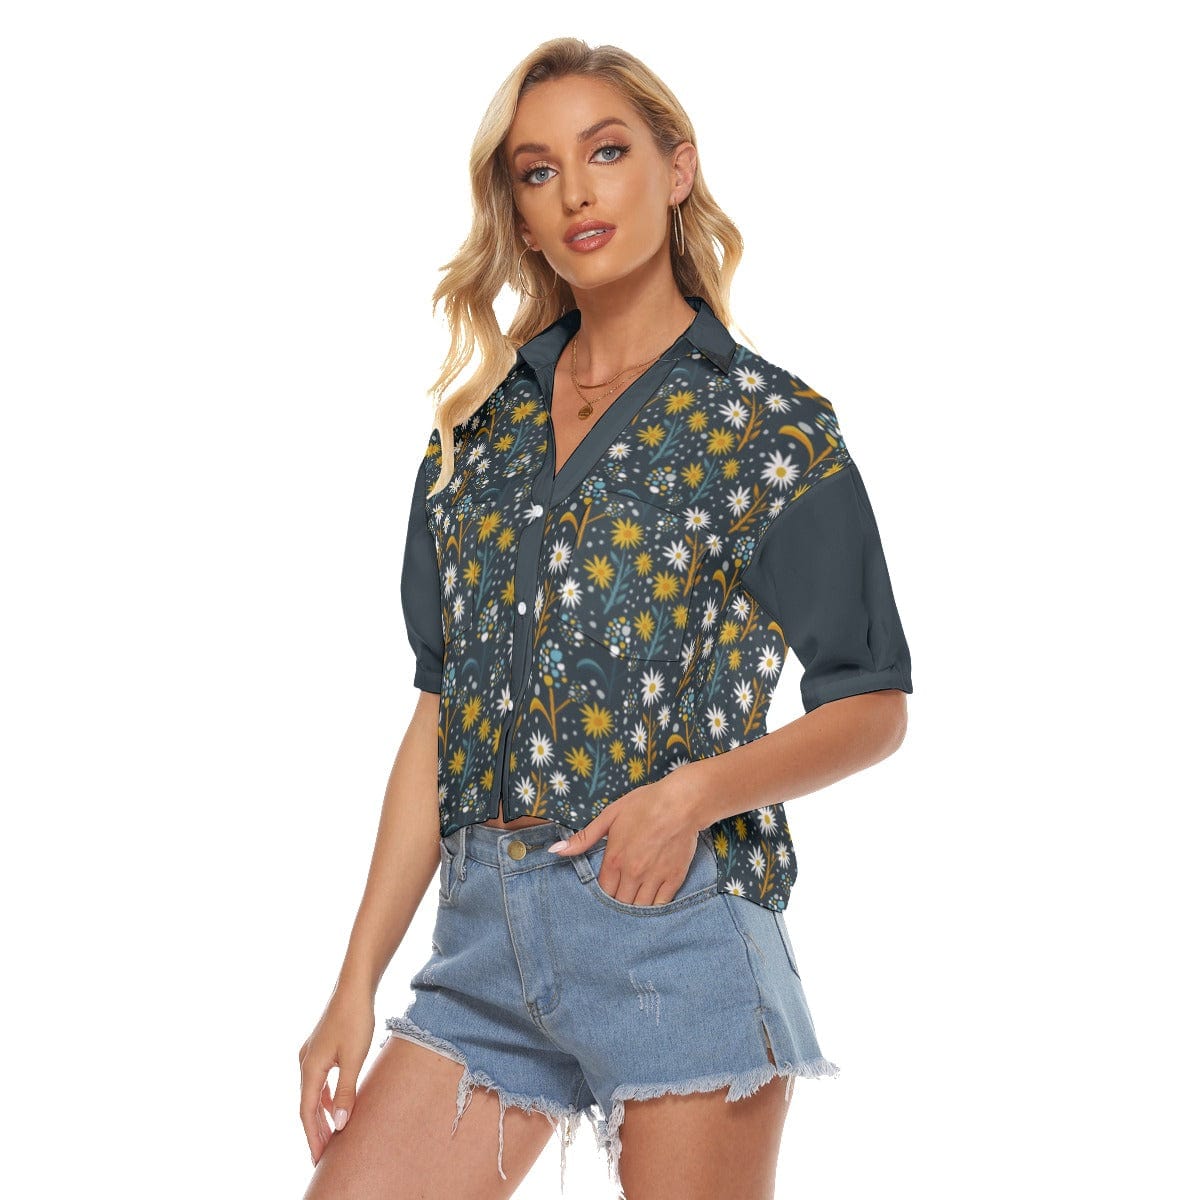 All-Over Print Women's V-neck Shirts | Spruced Roost